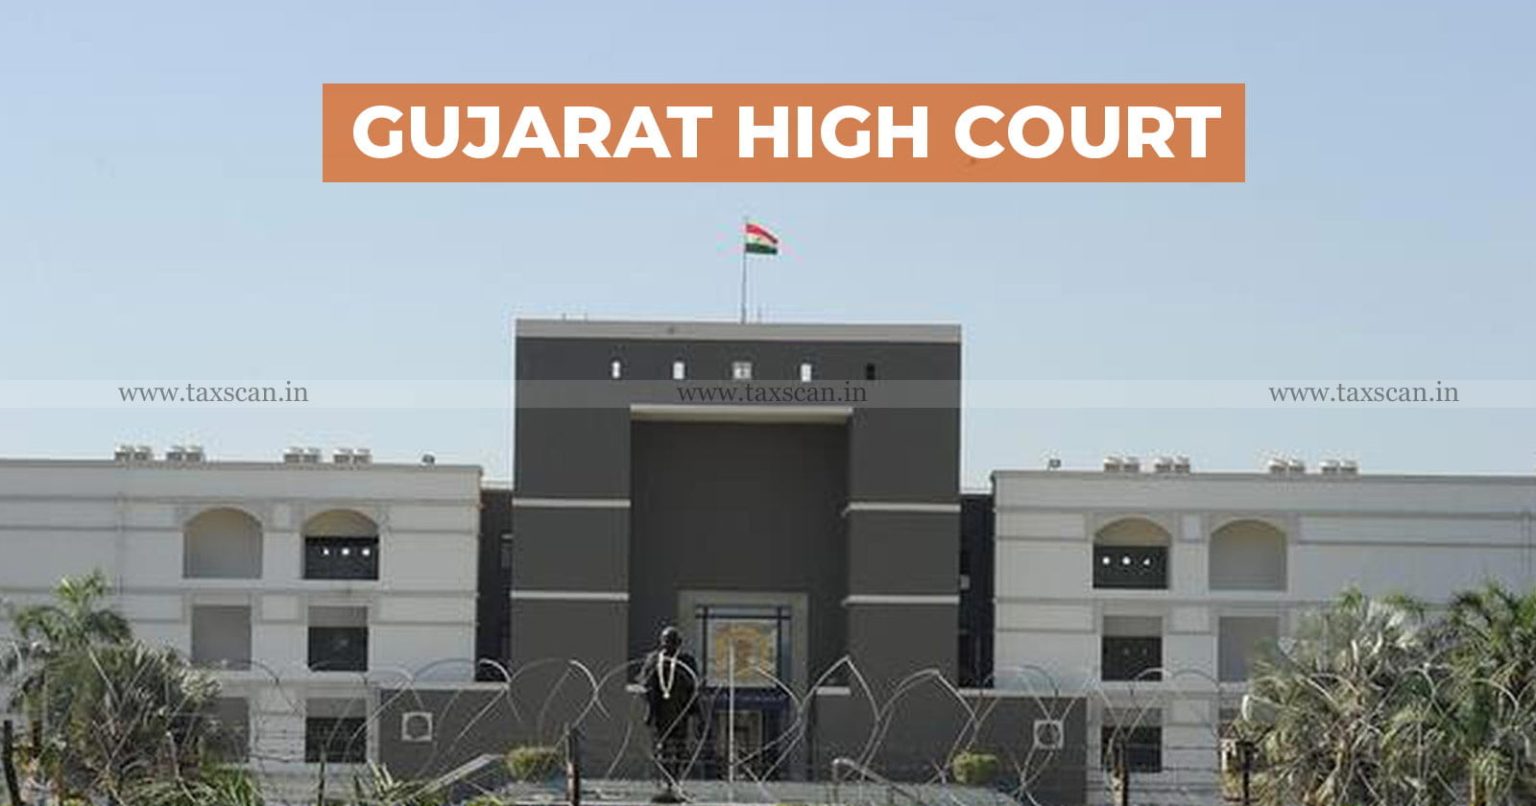 Collection of Tax - Gujarat High Court - Motor Vehicles Act - Motor Vehicles - Tax - Tax news - taxscan